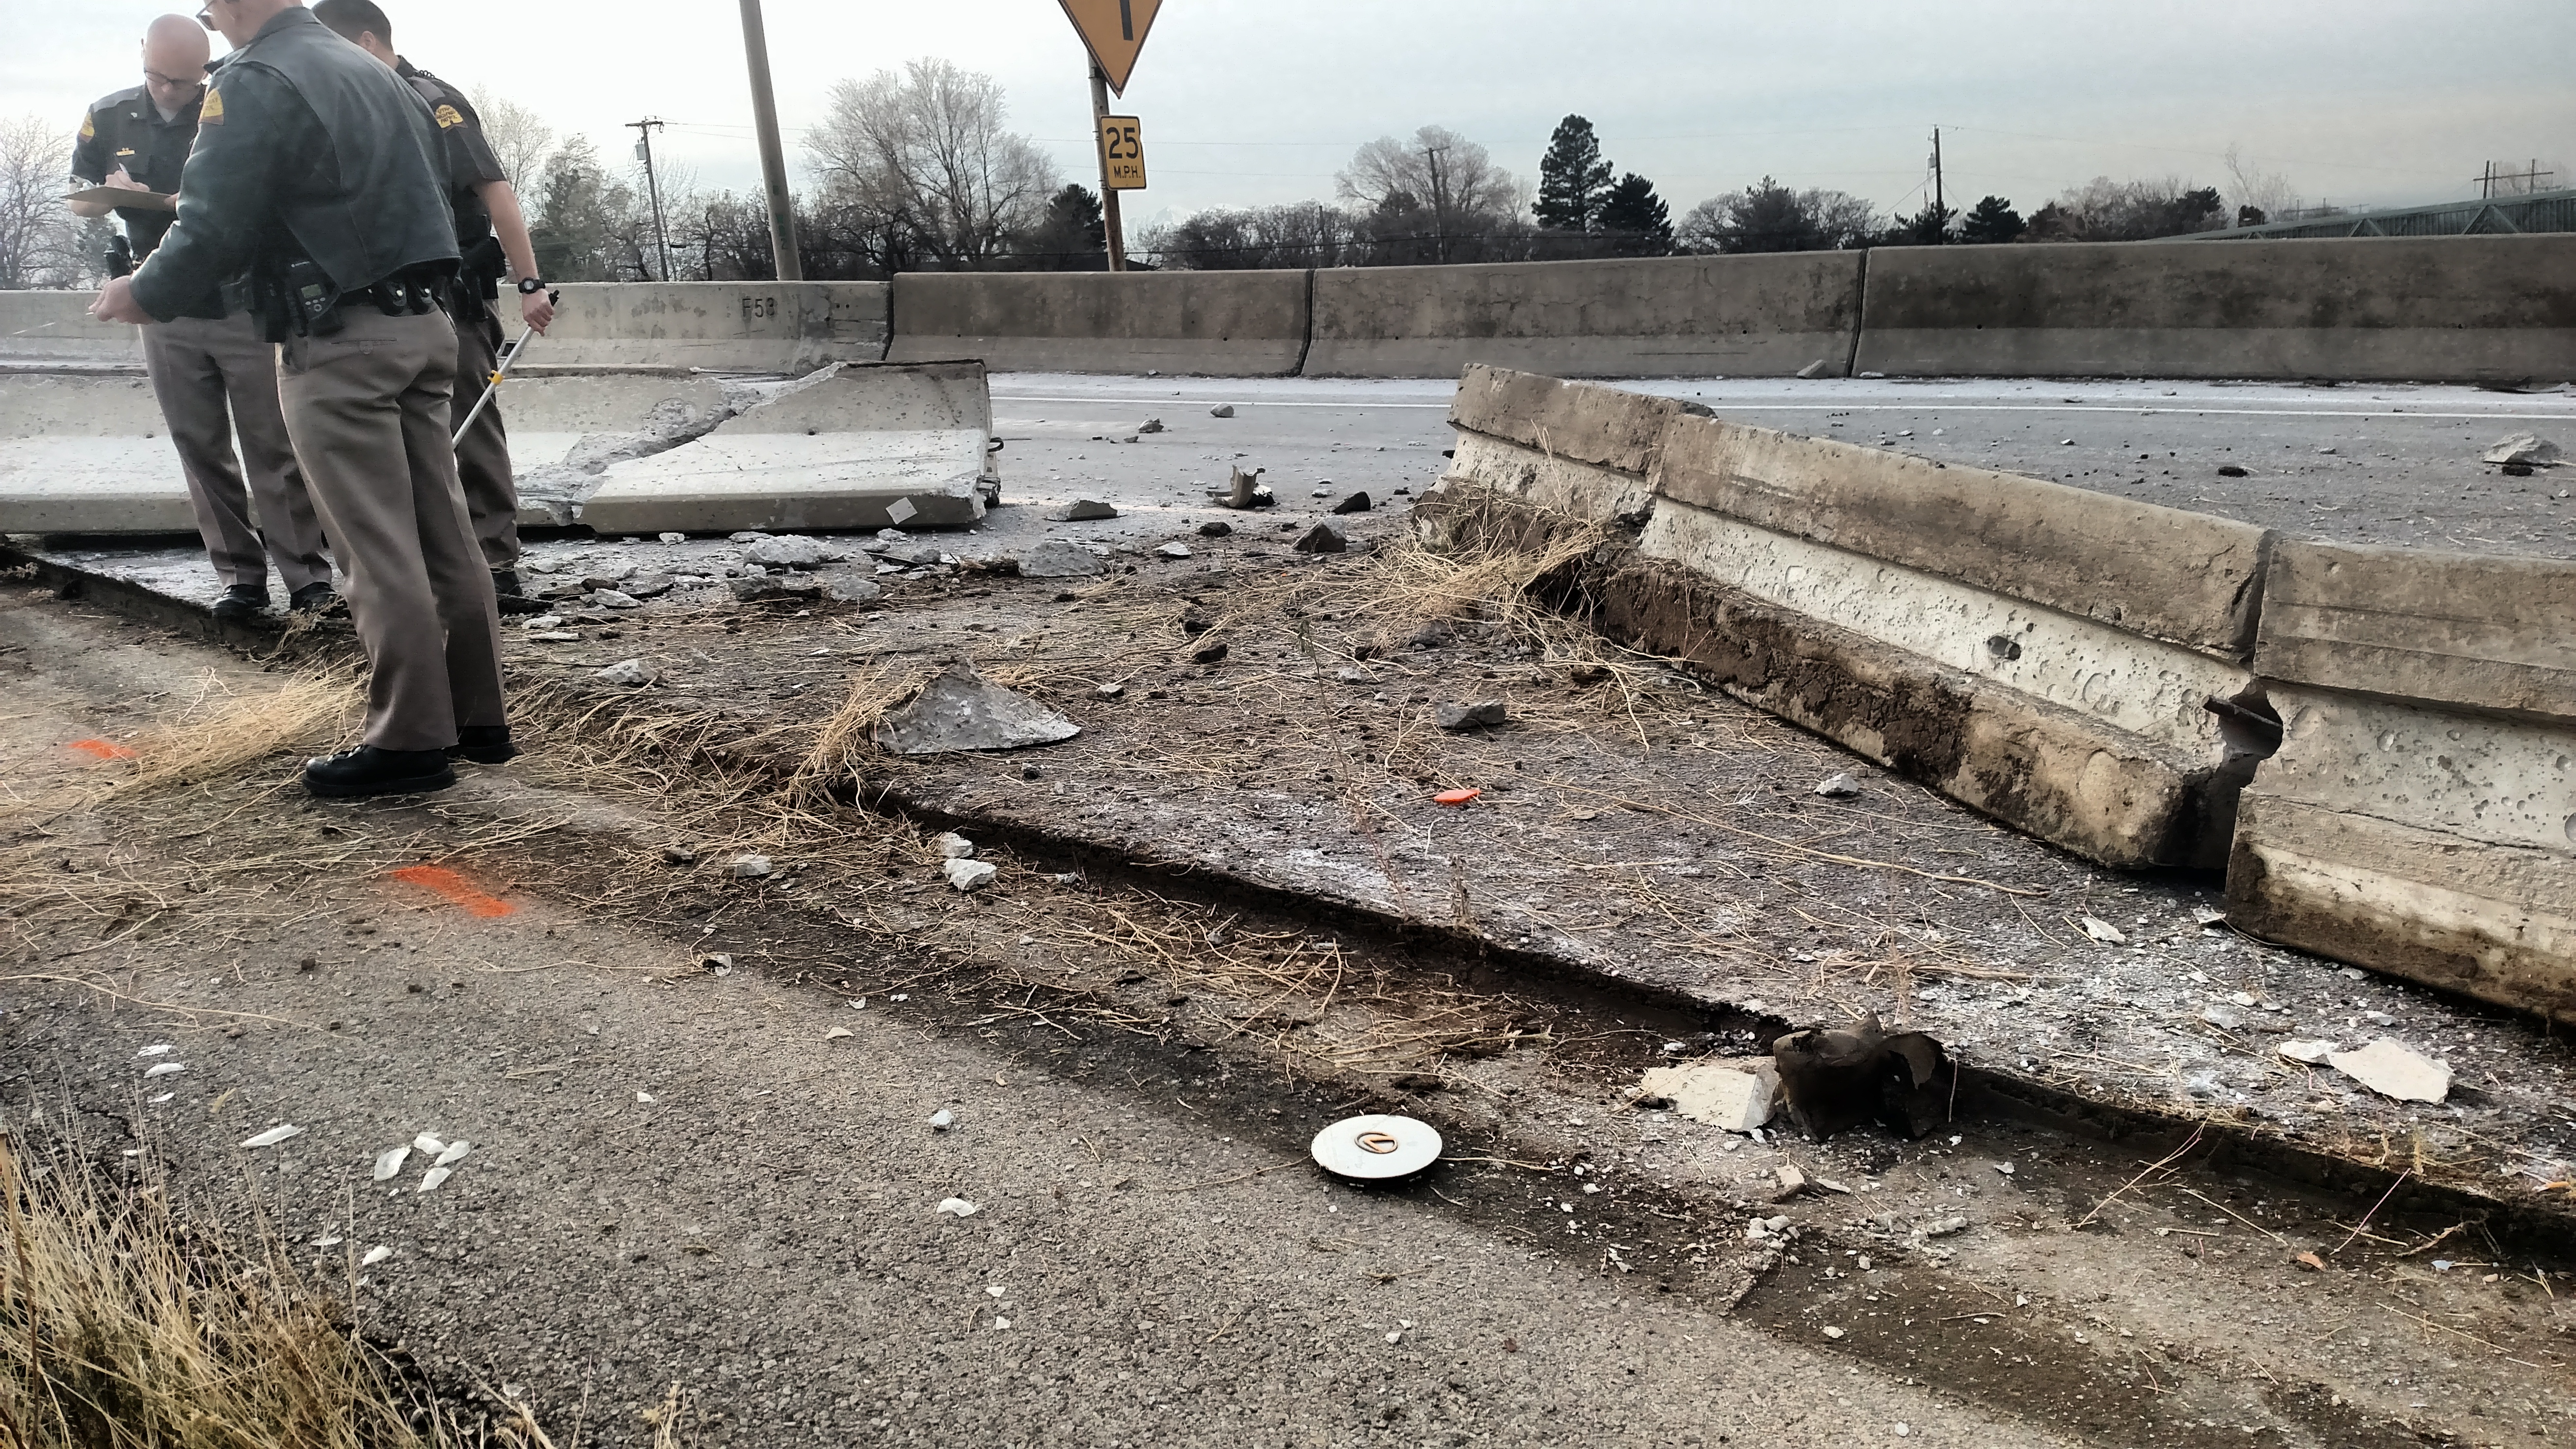 Man Dies After Hitting I-215 On-Ramp Barrier | Gephardt Daily